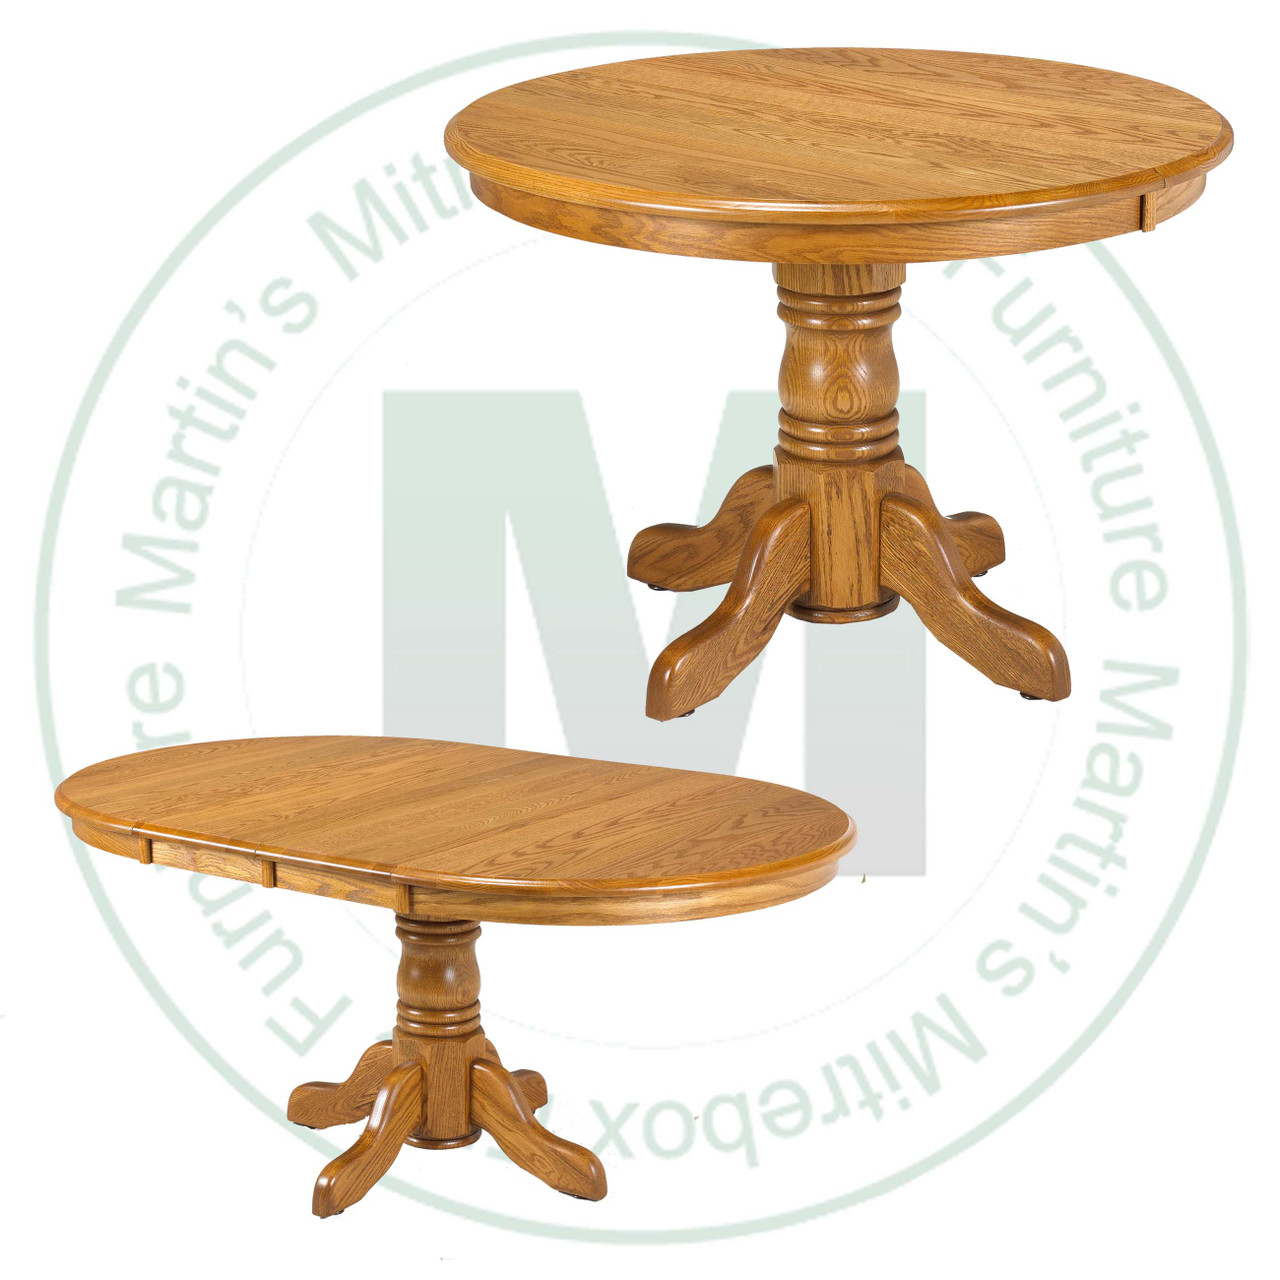 Maple Lancaster Collection Single Pedestal Table 36''D x 42''W x 30''H With 1 - 12'' Leaf. Table Has 1.25'' Thick Top